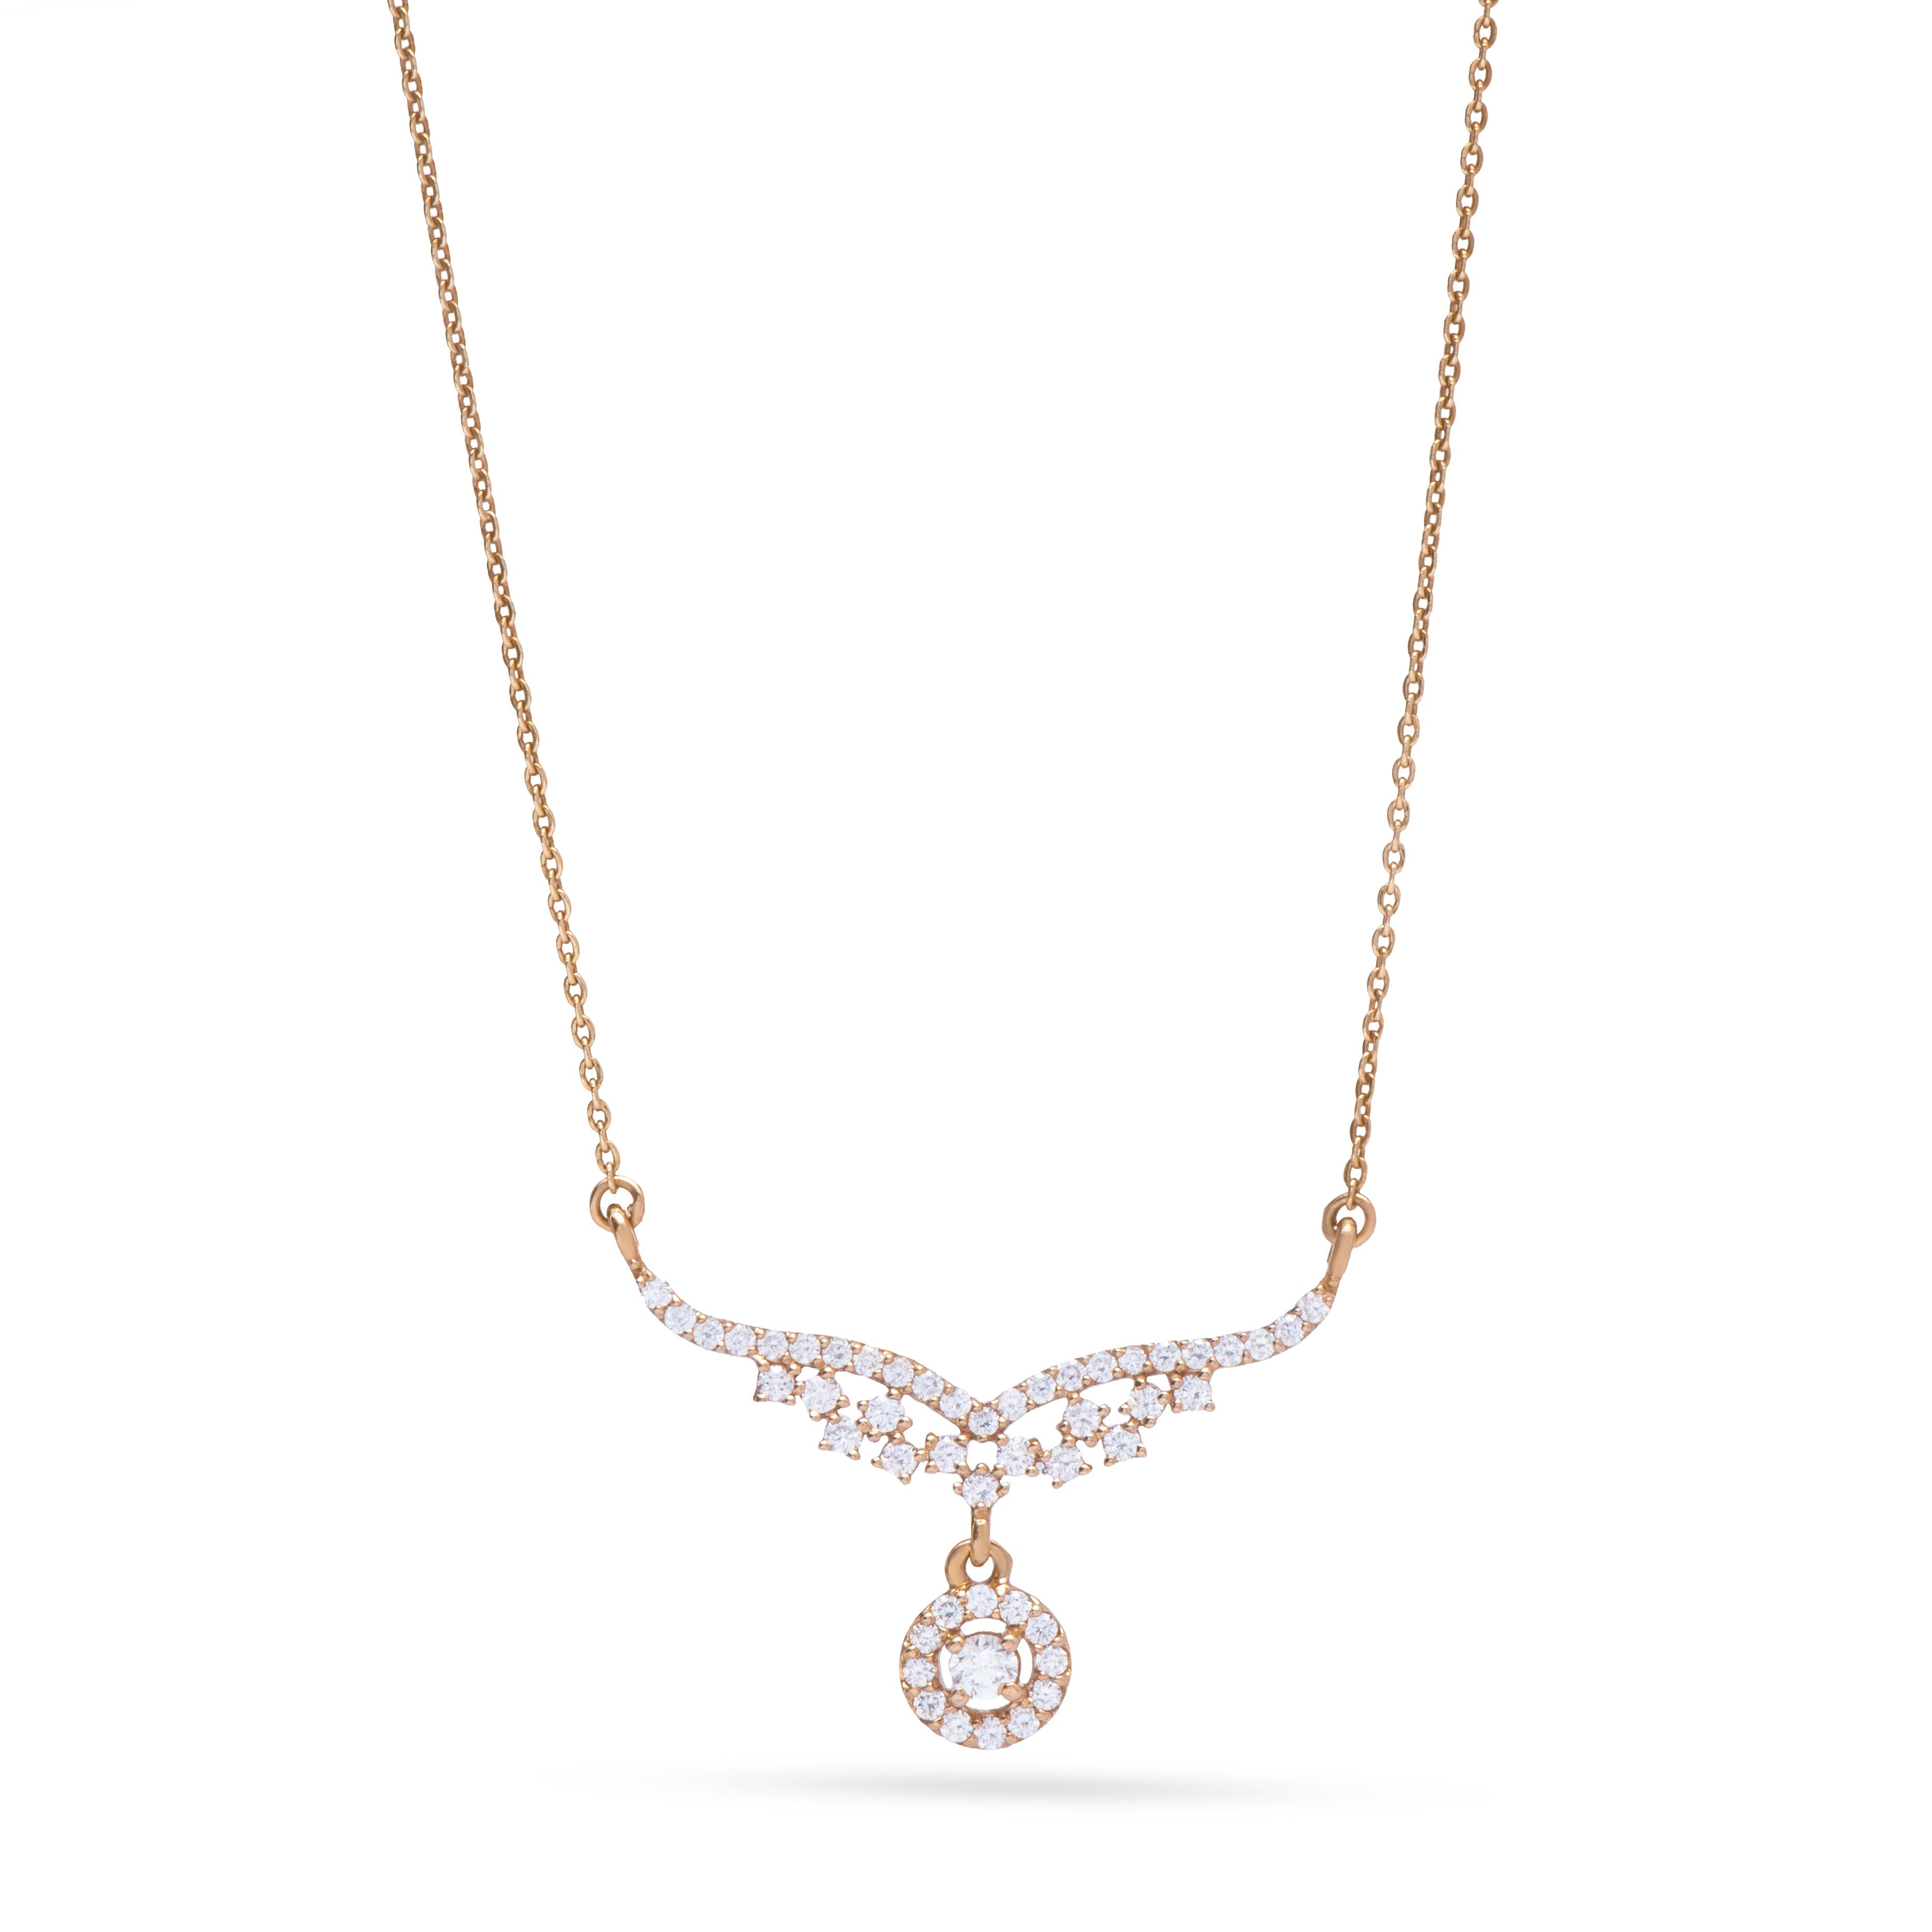 Queen's Diamond necklace in ROSE 18K Gold - SIR1091